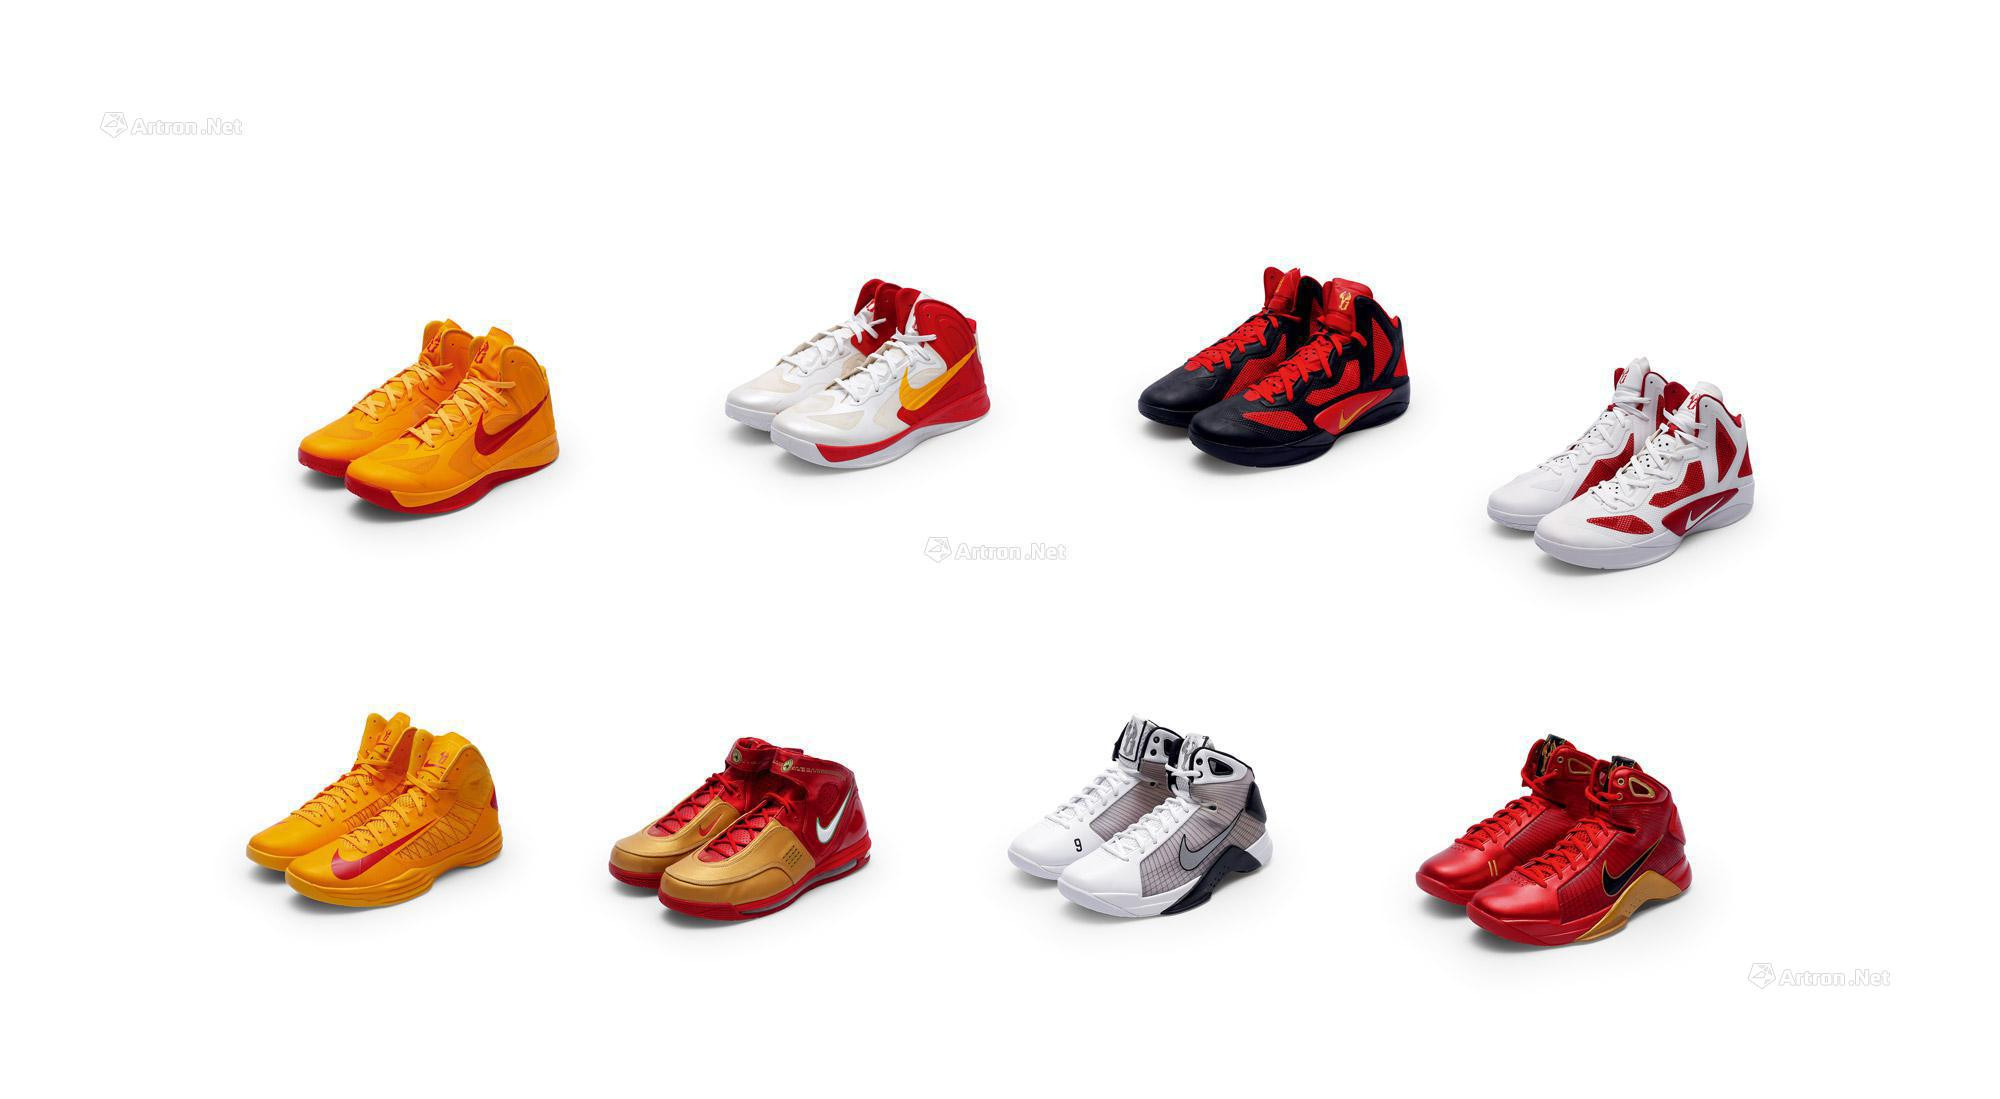 Yi Jianlian Exclusive Sneaker Collection  8 Pairs of Player Exclusive Sneakers